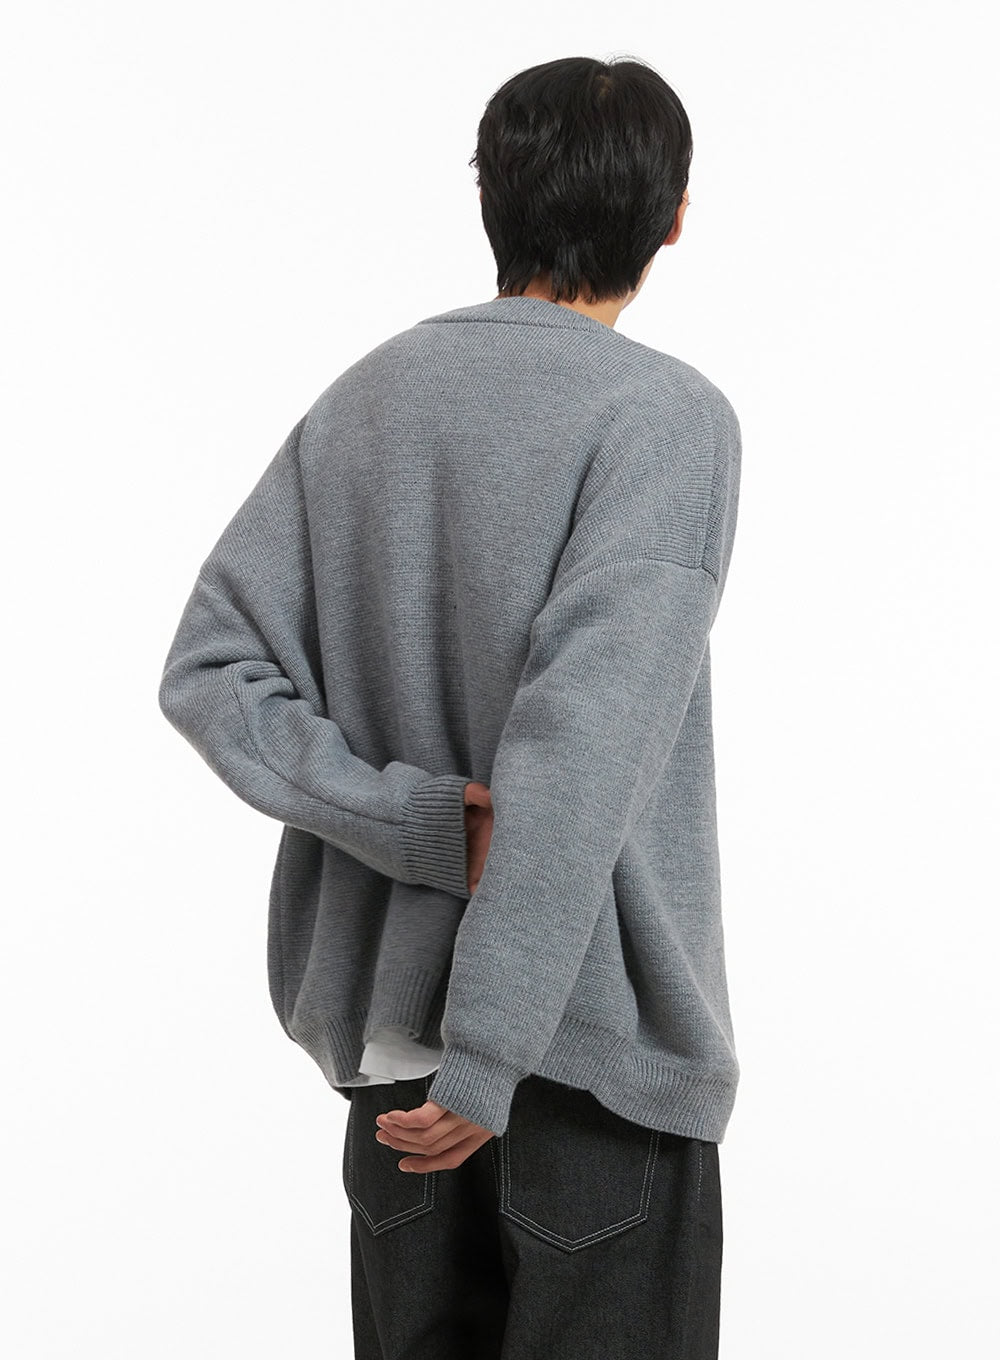 mens-oversized-buttoned-cardigan-gray-iy416